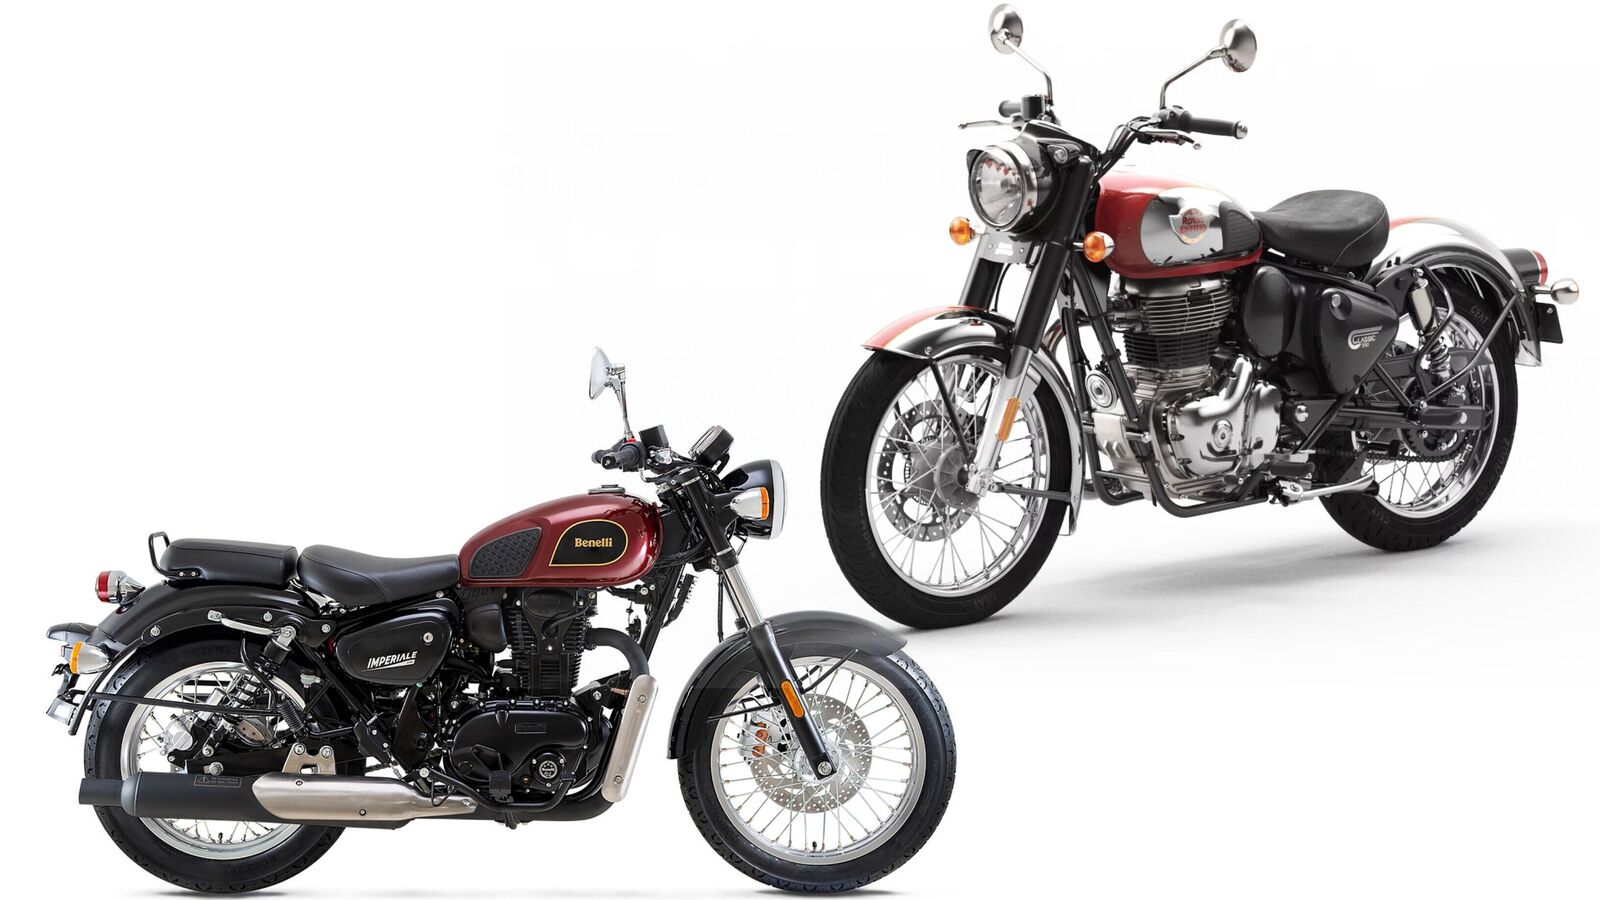 Royal Enfield Classic 350 vs Benelli Imperiale 400: Which one should you buy?